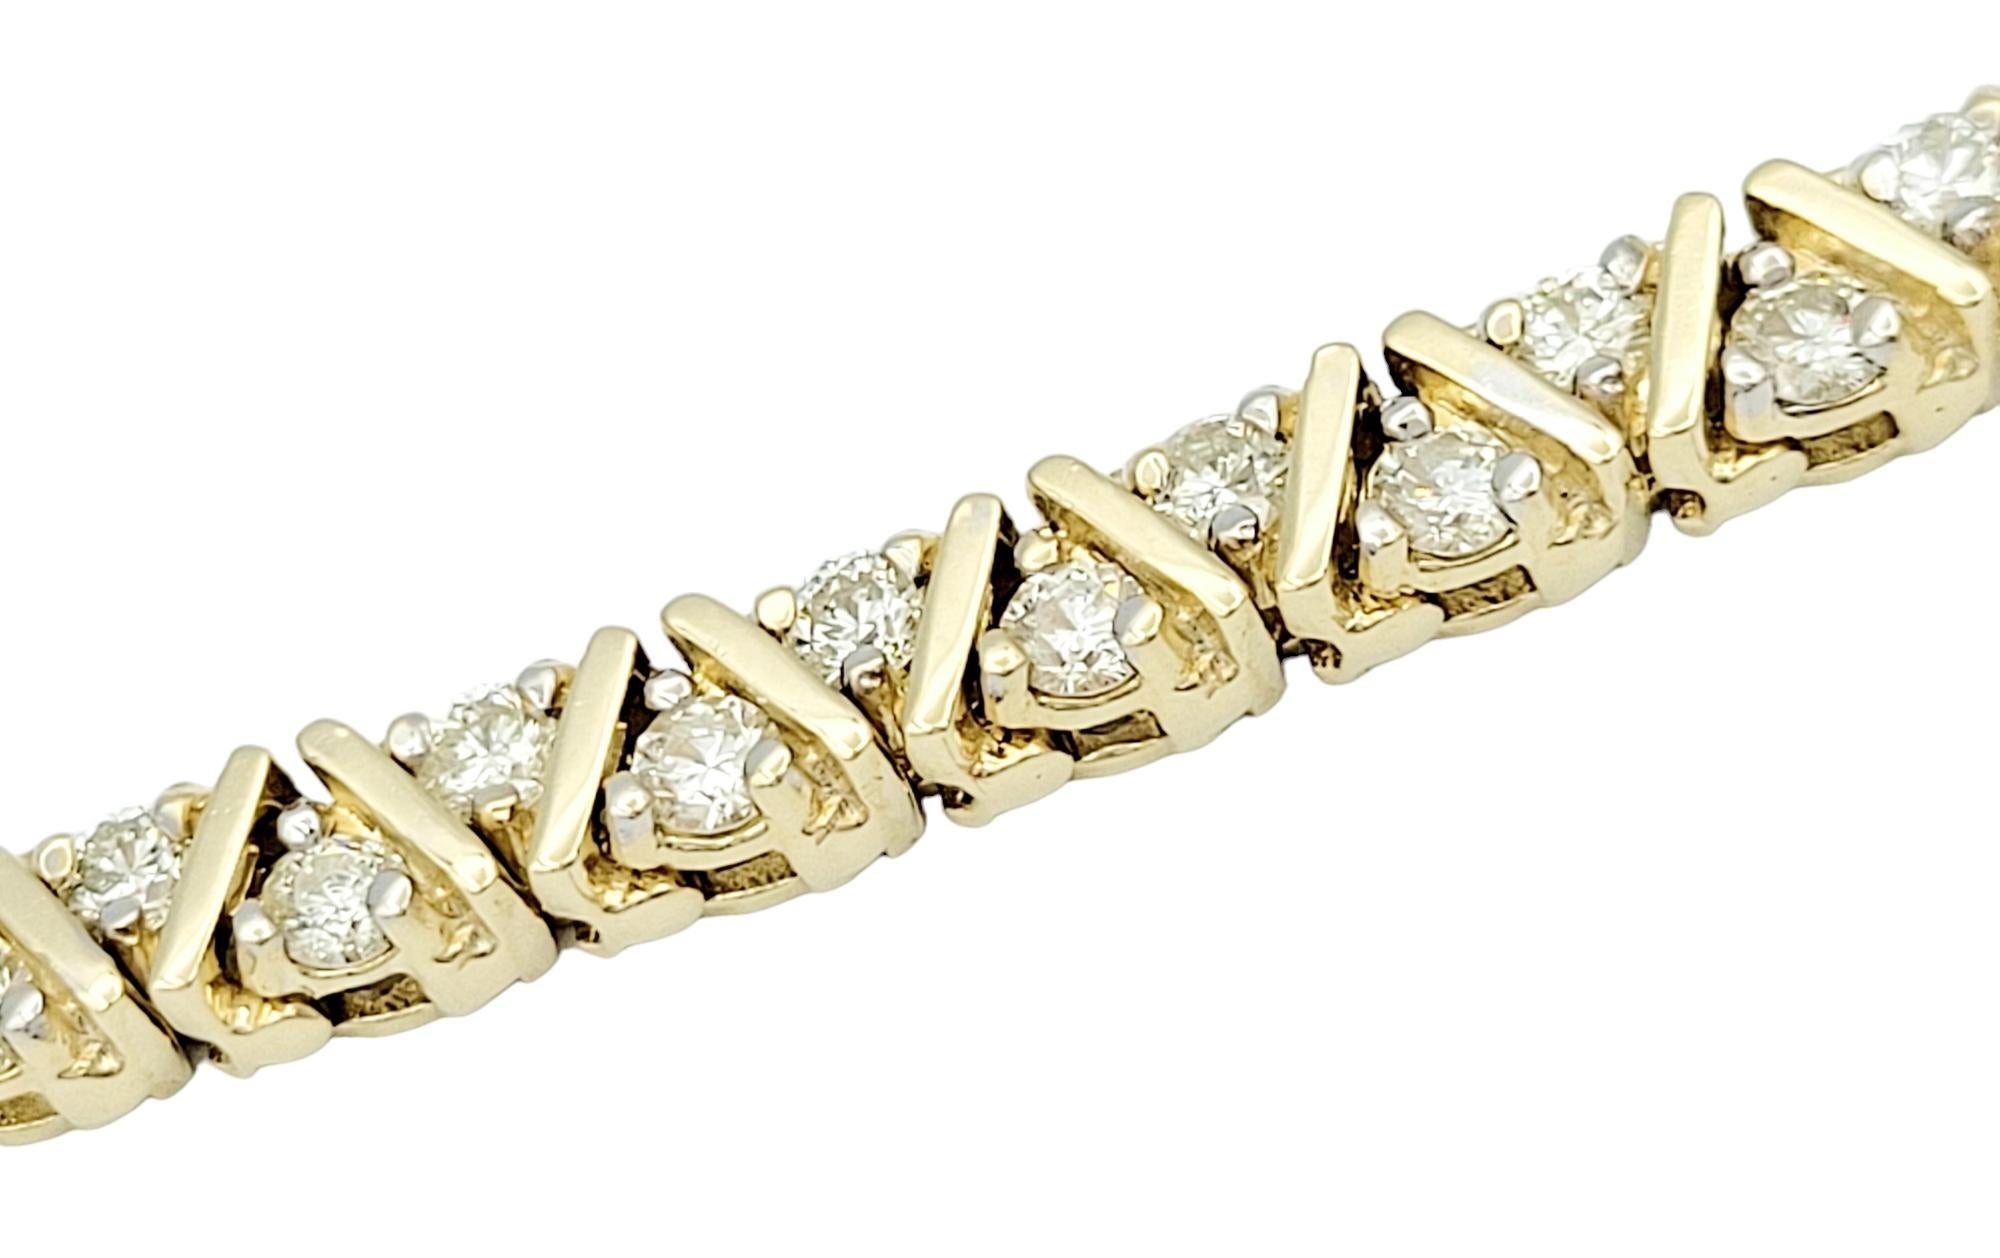 This gold bracelet, crafted in 14 karat yellow gold, exudes timeless elegance with a sophisticated geometric design. The bracelet features diamonds set within triangular gold elements, creating a harmonious balance between simplicity and luxury. The